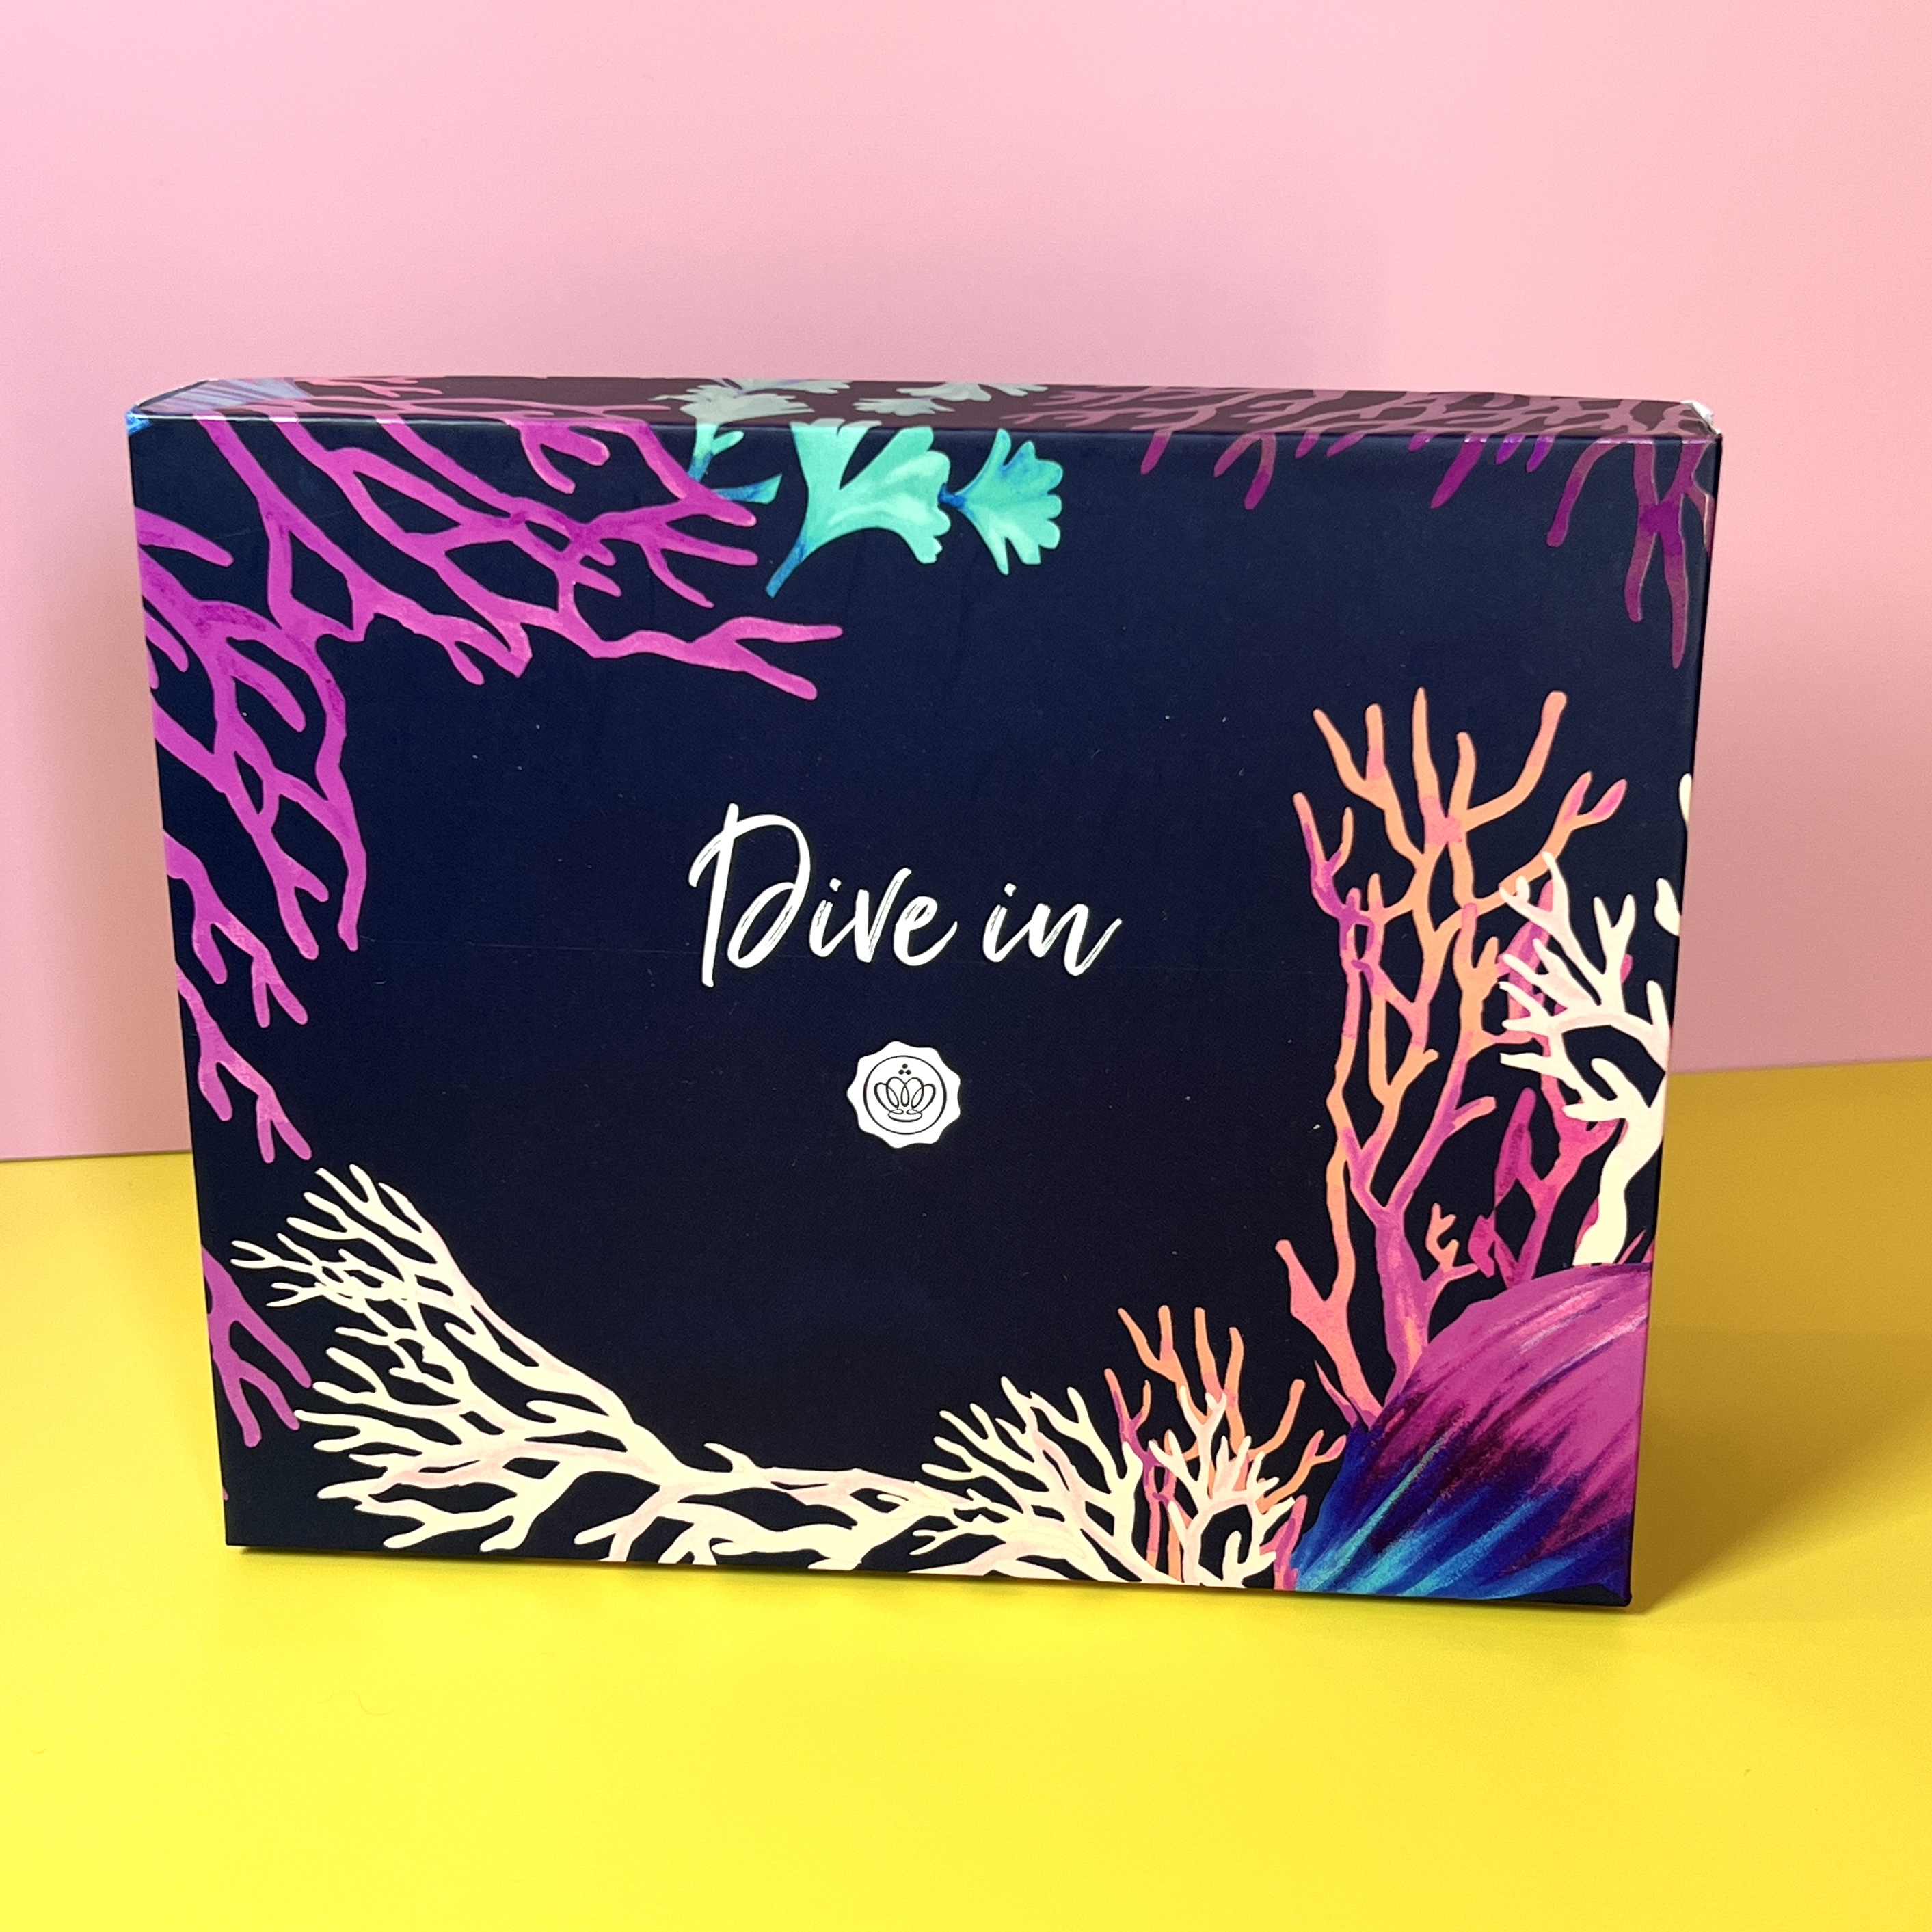 Box for GlossyBox July 2022